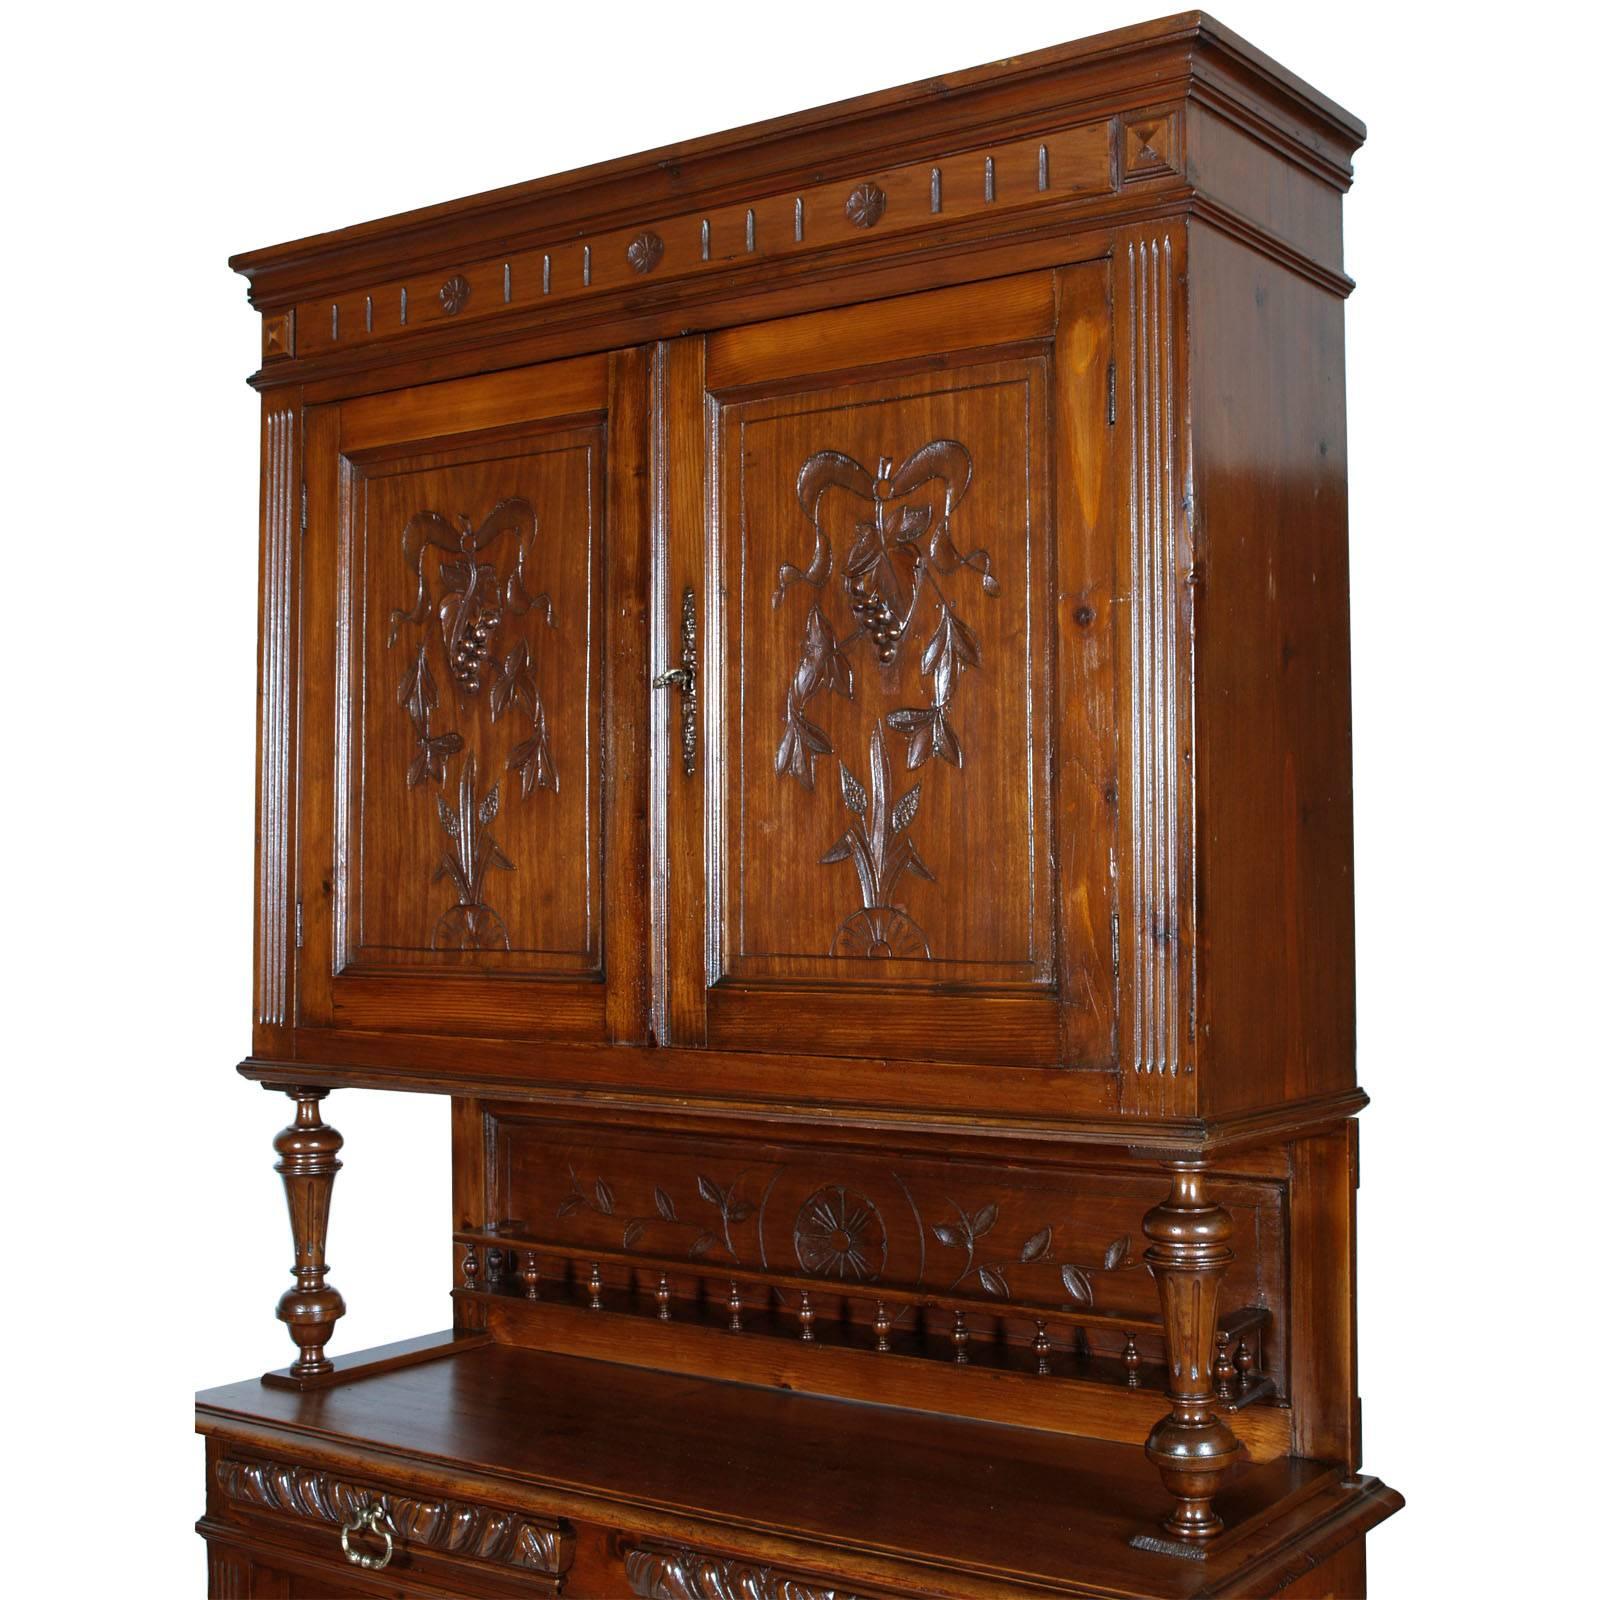 French Art Nouveau Provencal Hand-Carved Solid Wood Sideboard Restored and Wax Polished For Sale